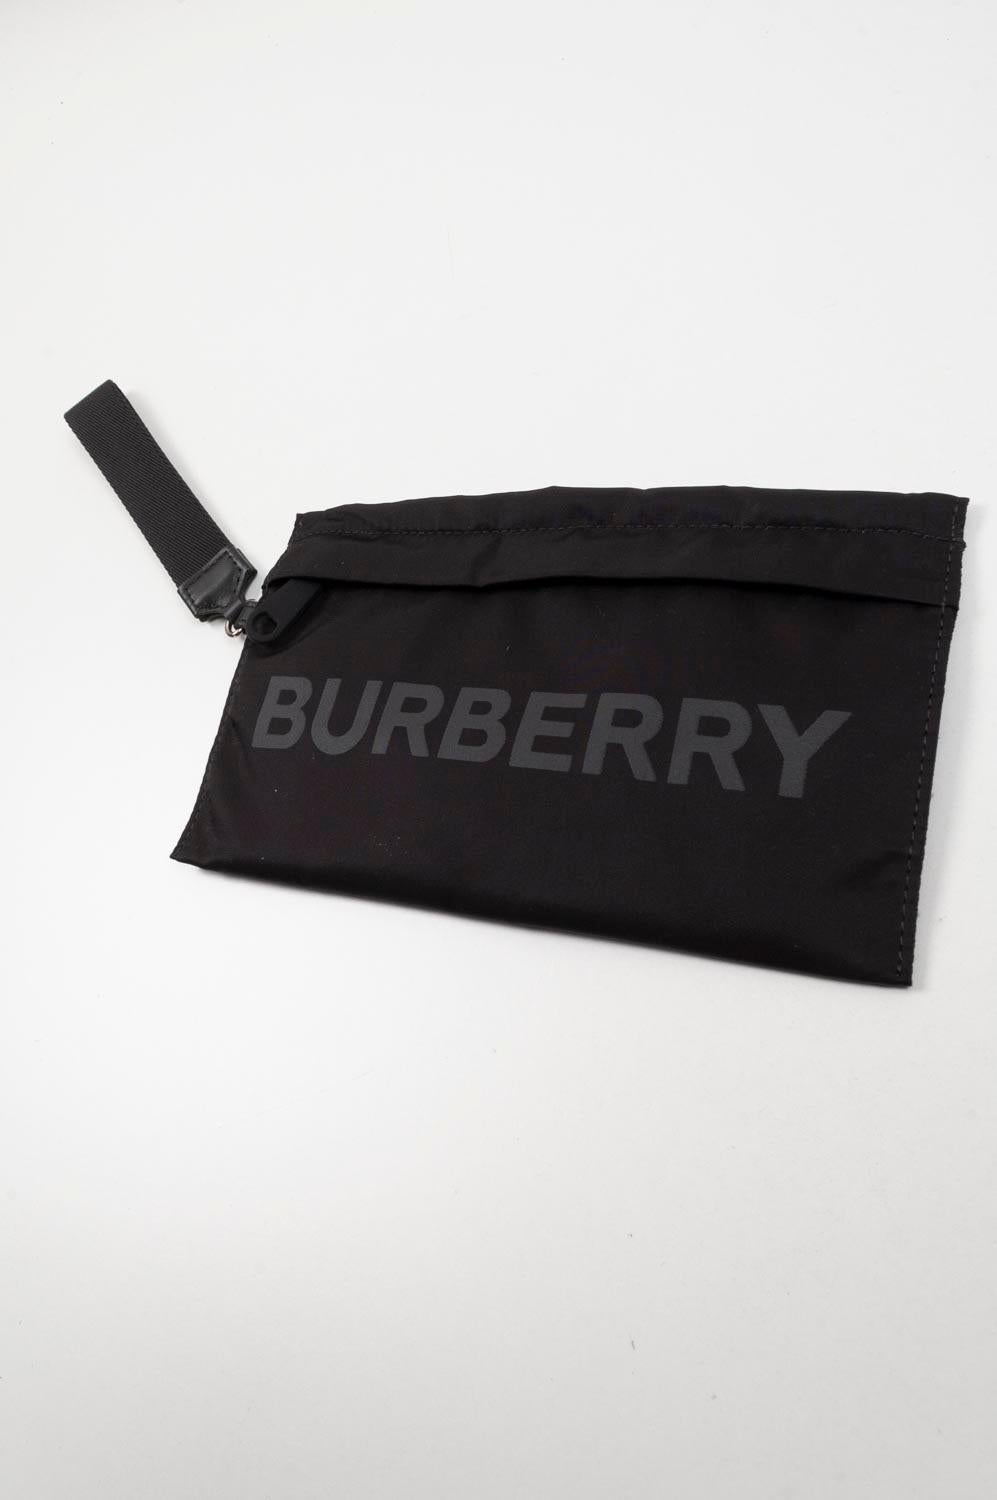 Item for sale is 100% genuine Burberry Women Men Handbag, S323
Color: Black
(An actual color may a bit vary due to individual computer screen interpretation)
Material: Cloth
Tag size: One Size
This bag is great quality item. Rate 10 of 10, New with